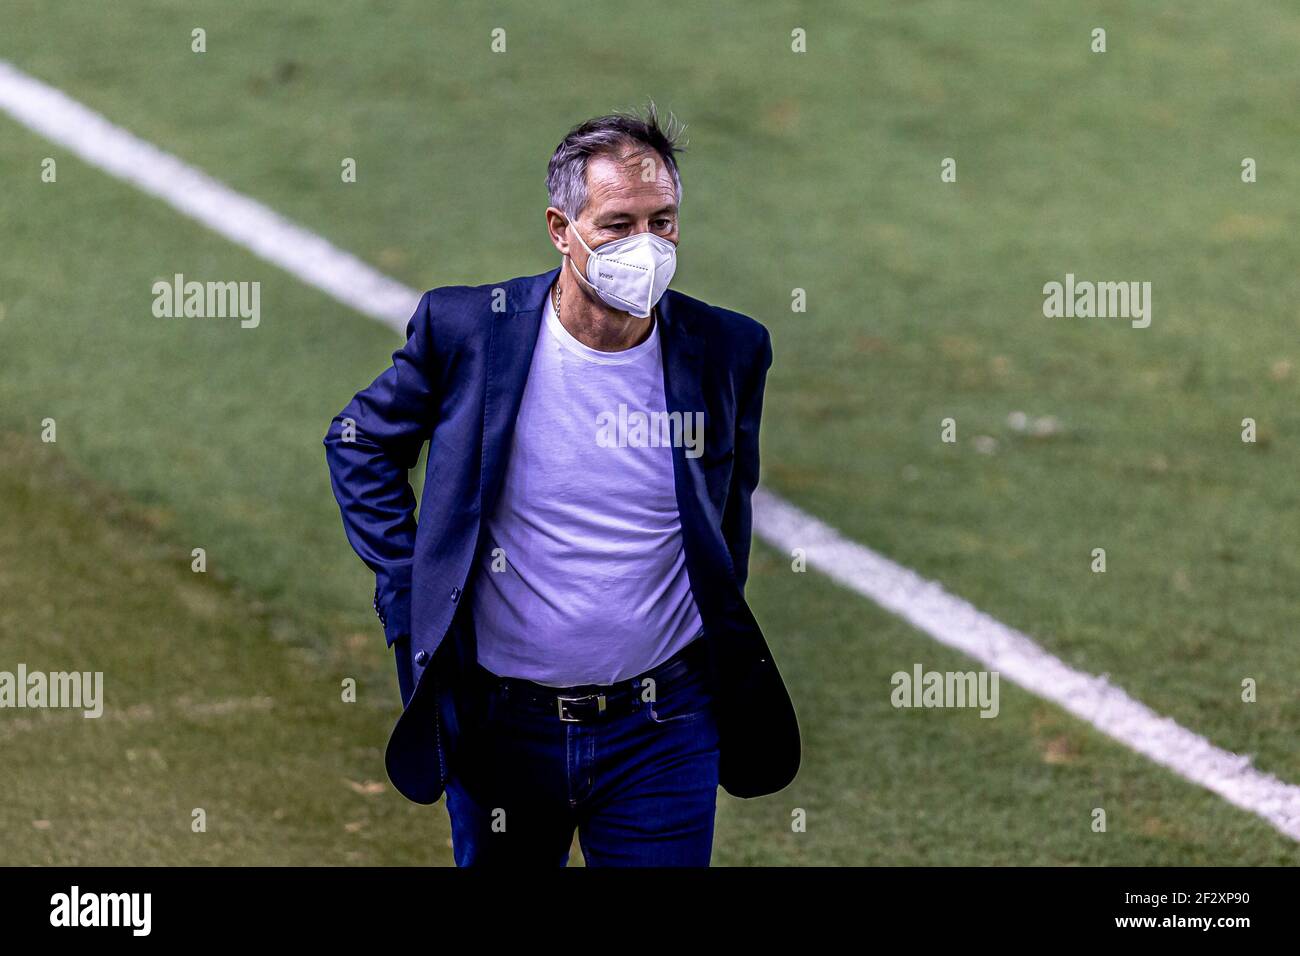 Santos, Brazil. 13th Mar, 2021. The coach Ariel Holan in the match between Santos and Ituano valid for the 4th round of the Paulista Championship Football Series A, held at Estádio Urbano Caldeira, Vila Belmiro, on the night of this Saturday, March 13, 2021. Credit: Van Campos/FotoArena/Alamy Live News Stock Photo